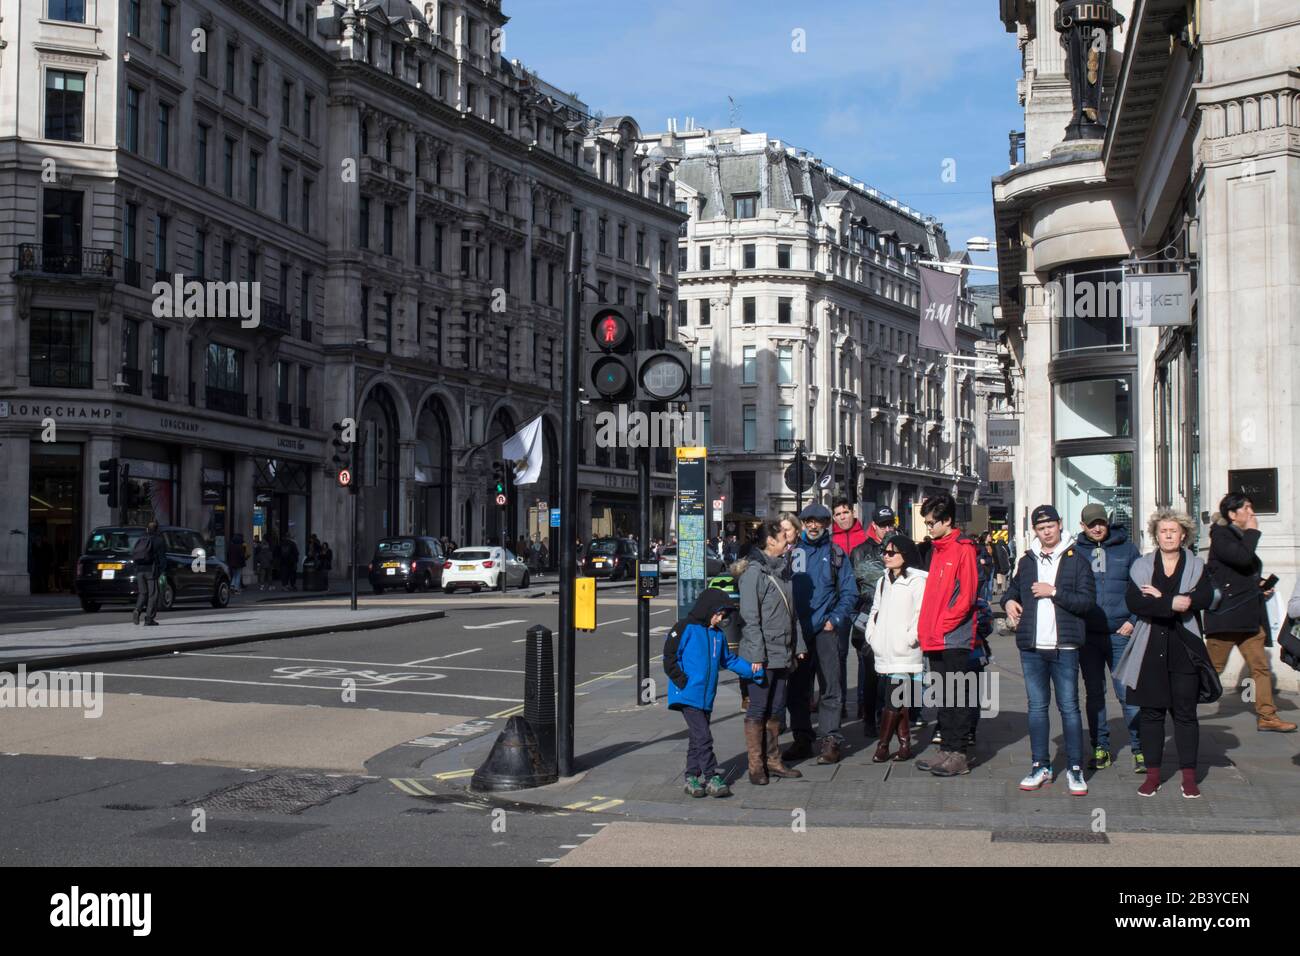 London, UK - 20 February, 2020, People waiting for the green light at a pedestrian crossing in Regent Street Stock Photo